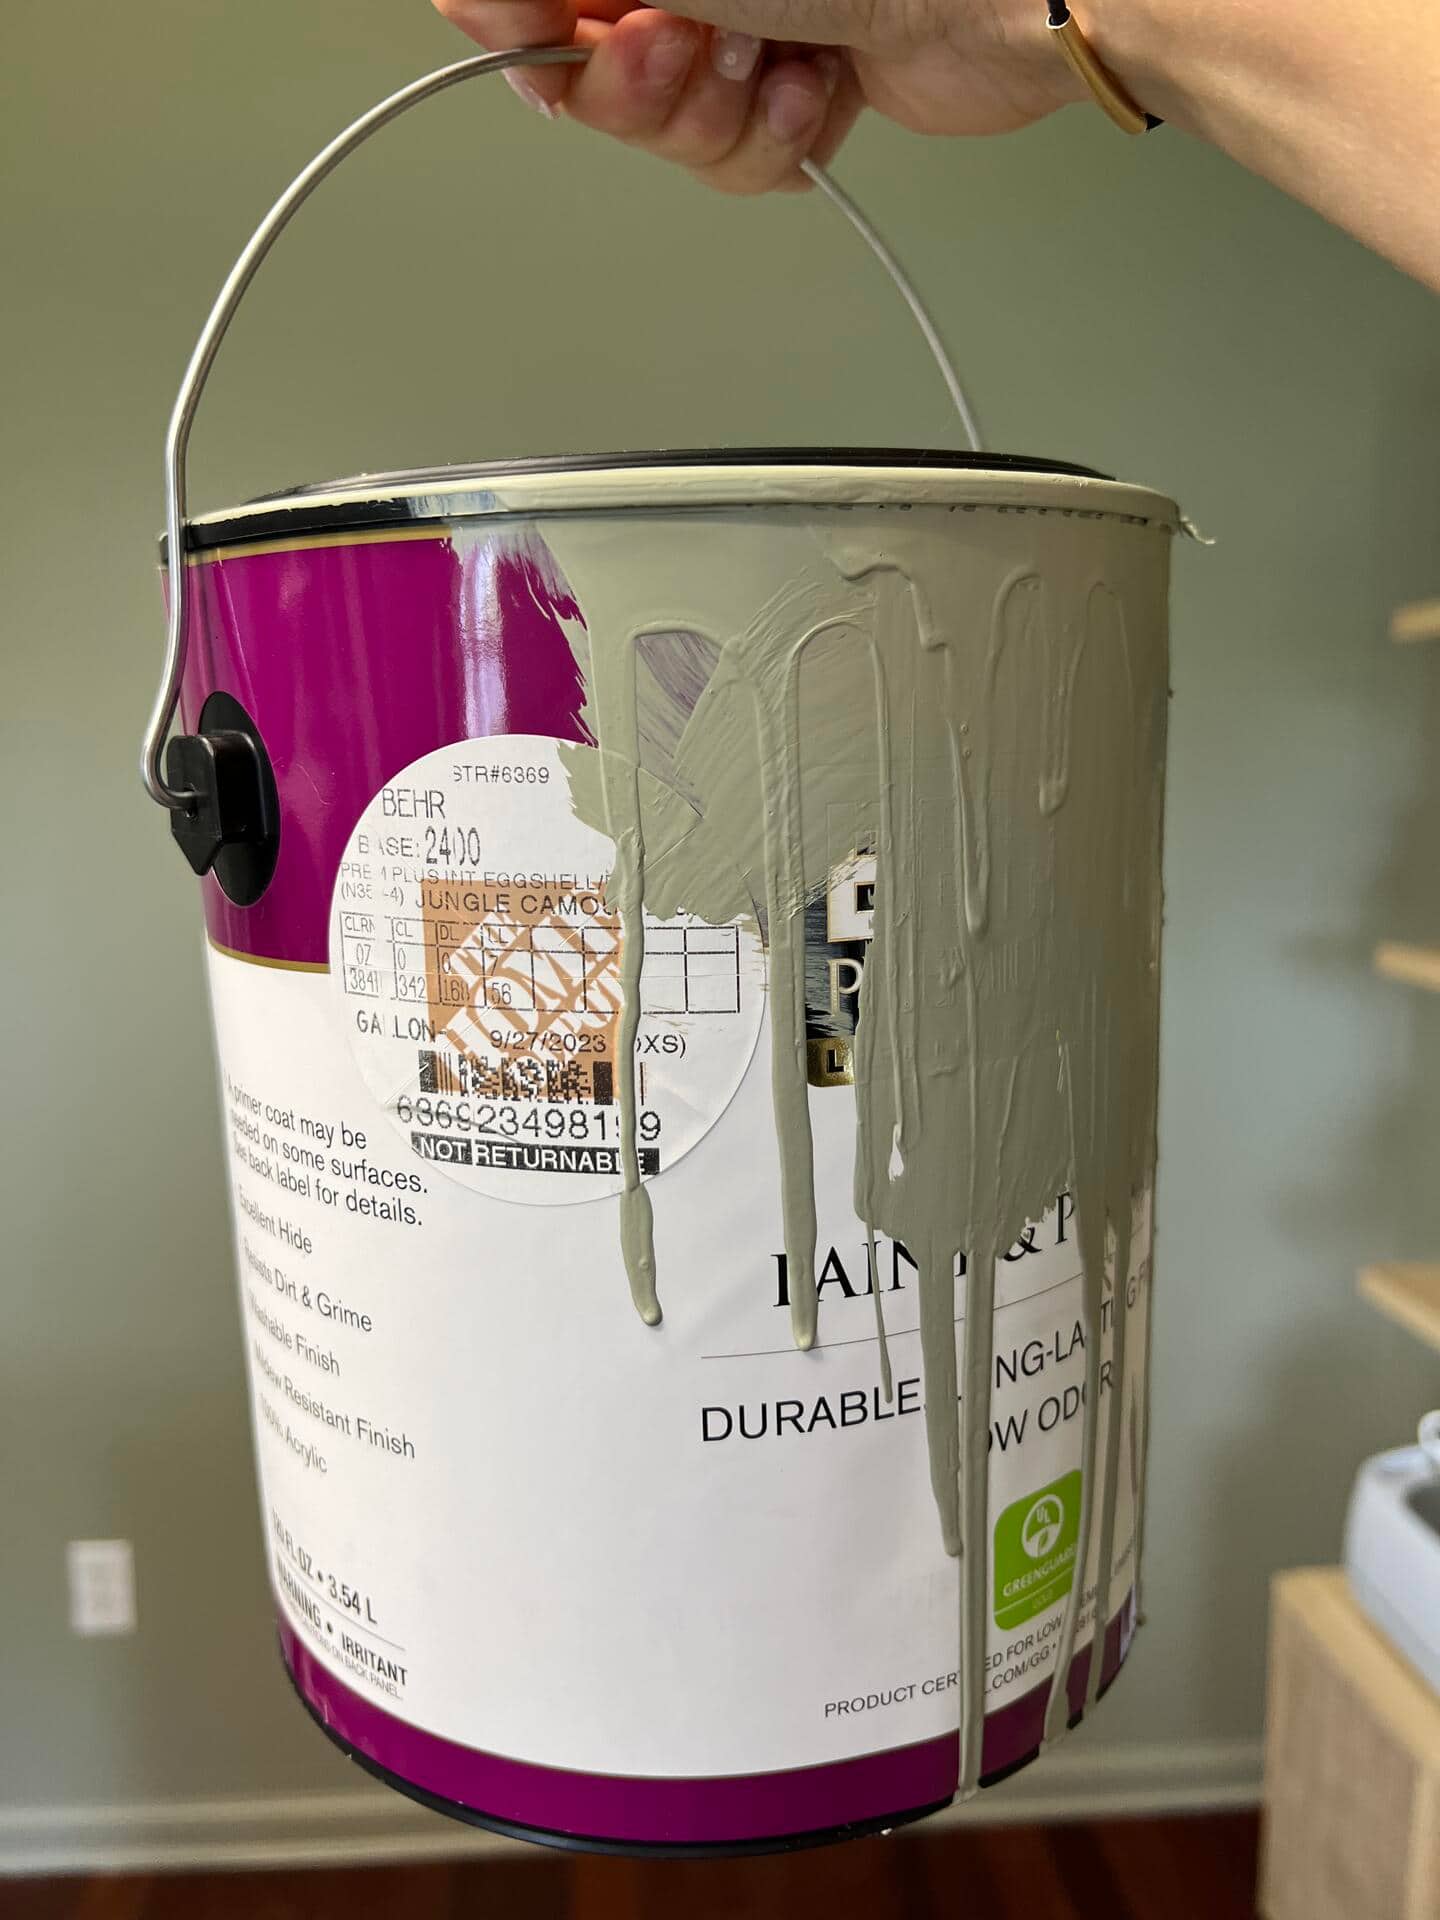 A can of paint.